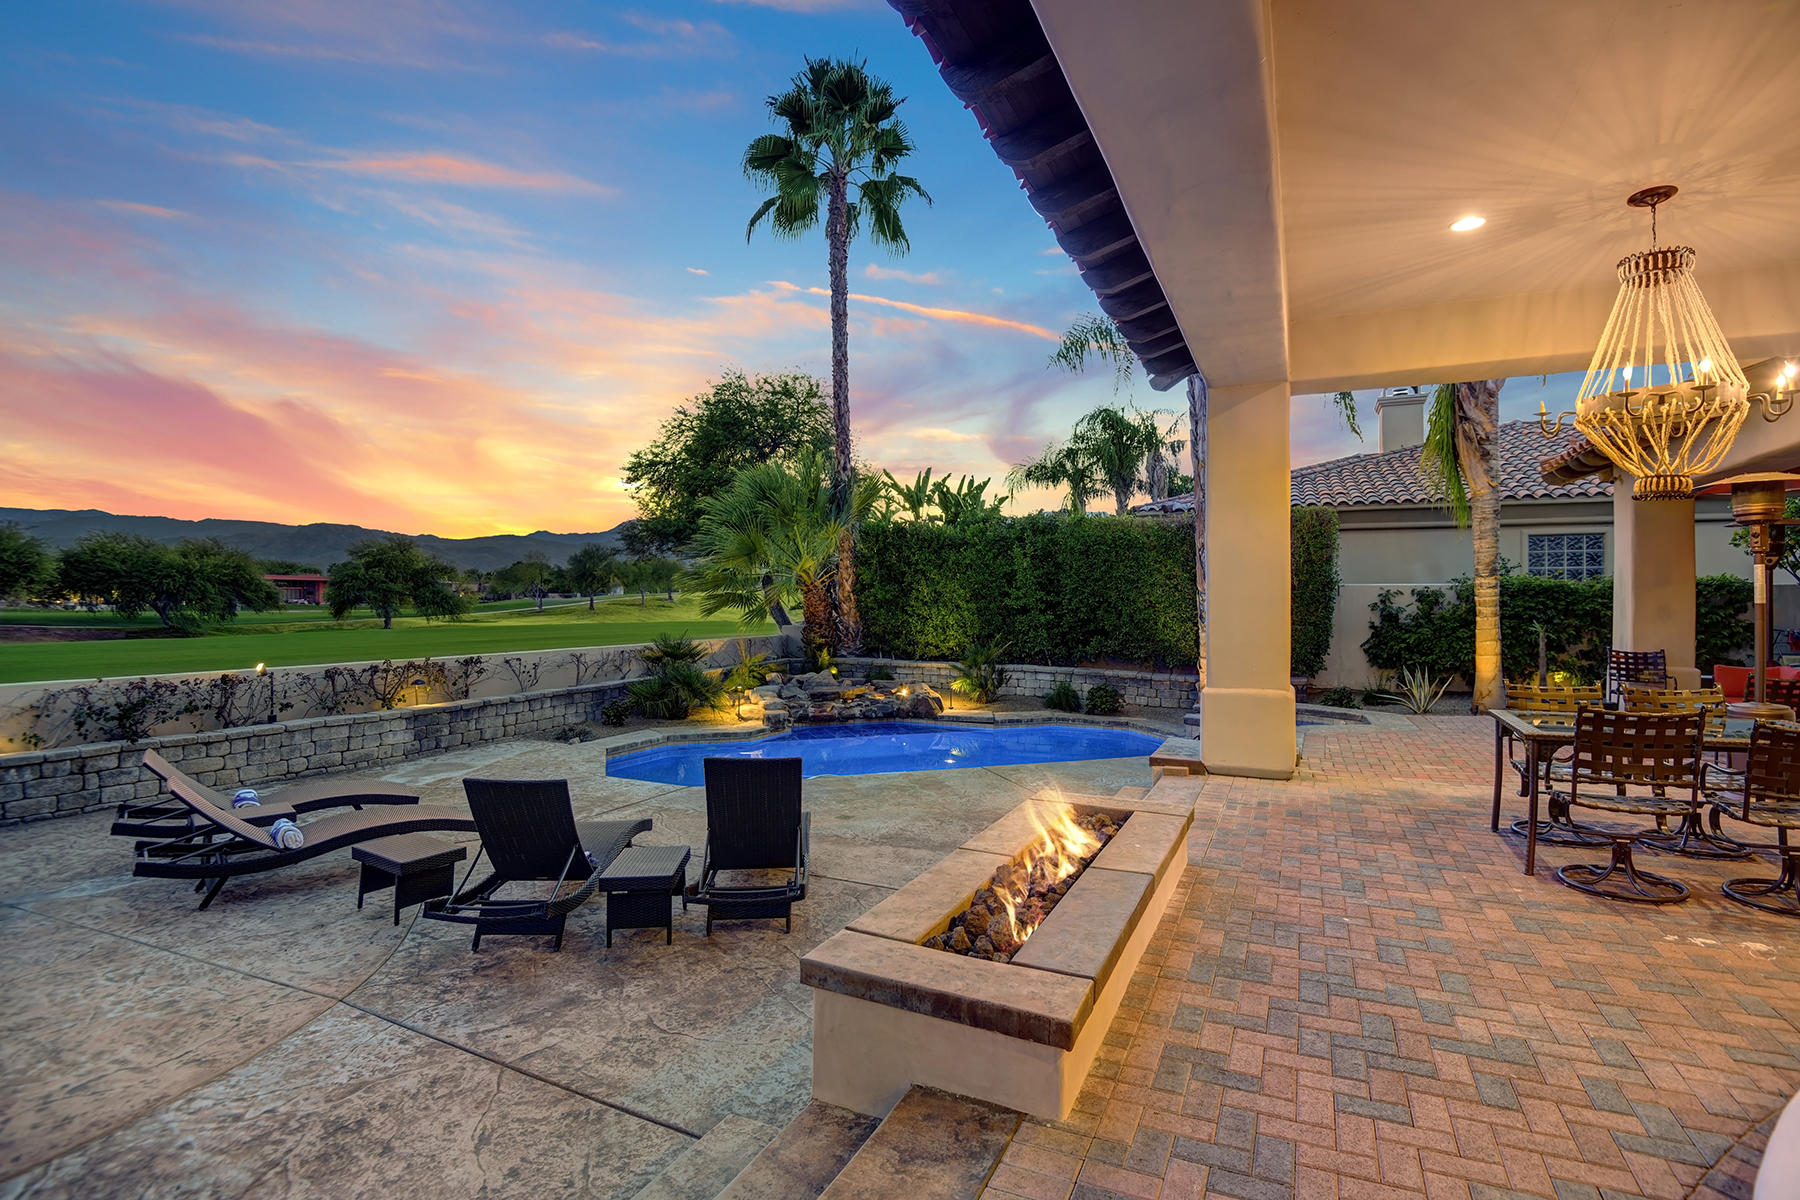 FIRE PIT TO POOL AND VIEW DUSK MLS